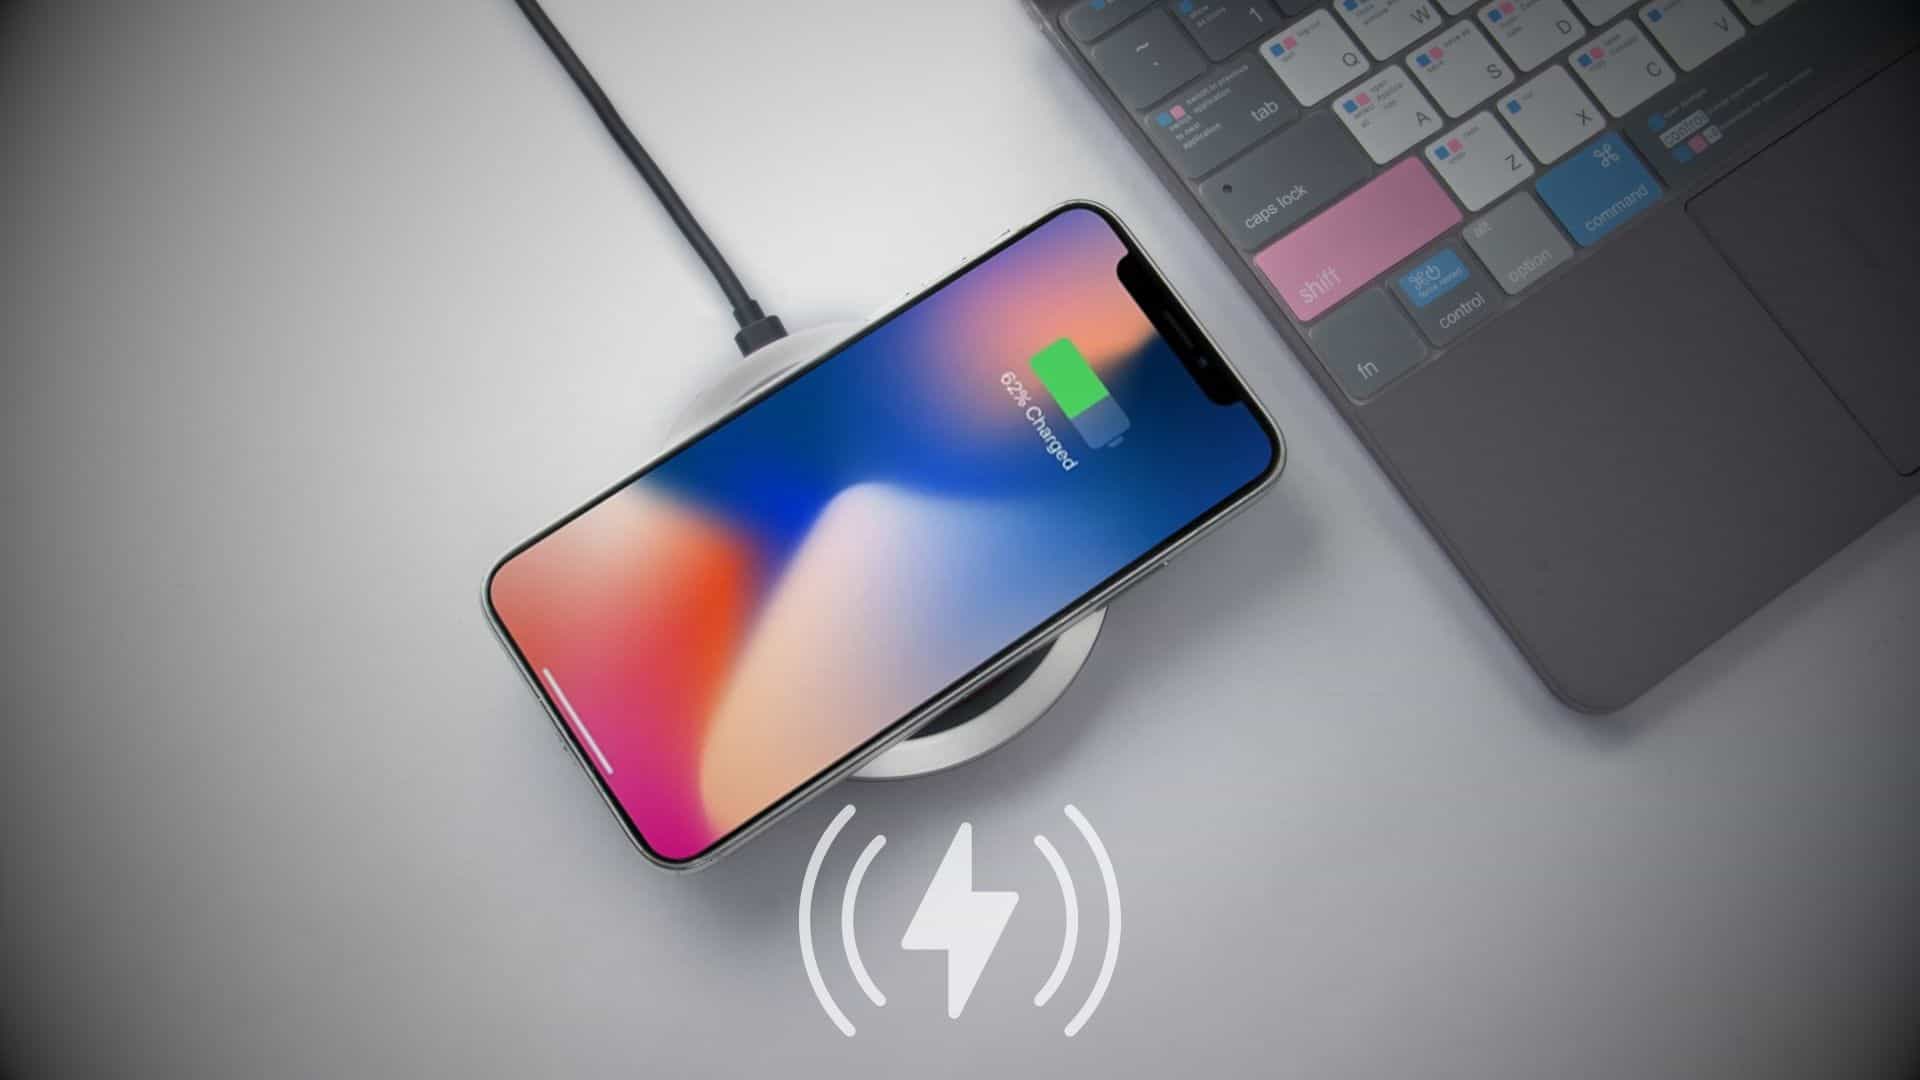 best iphone wireless chargers